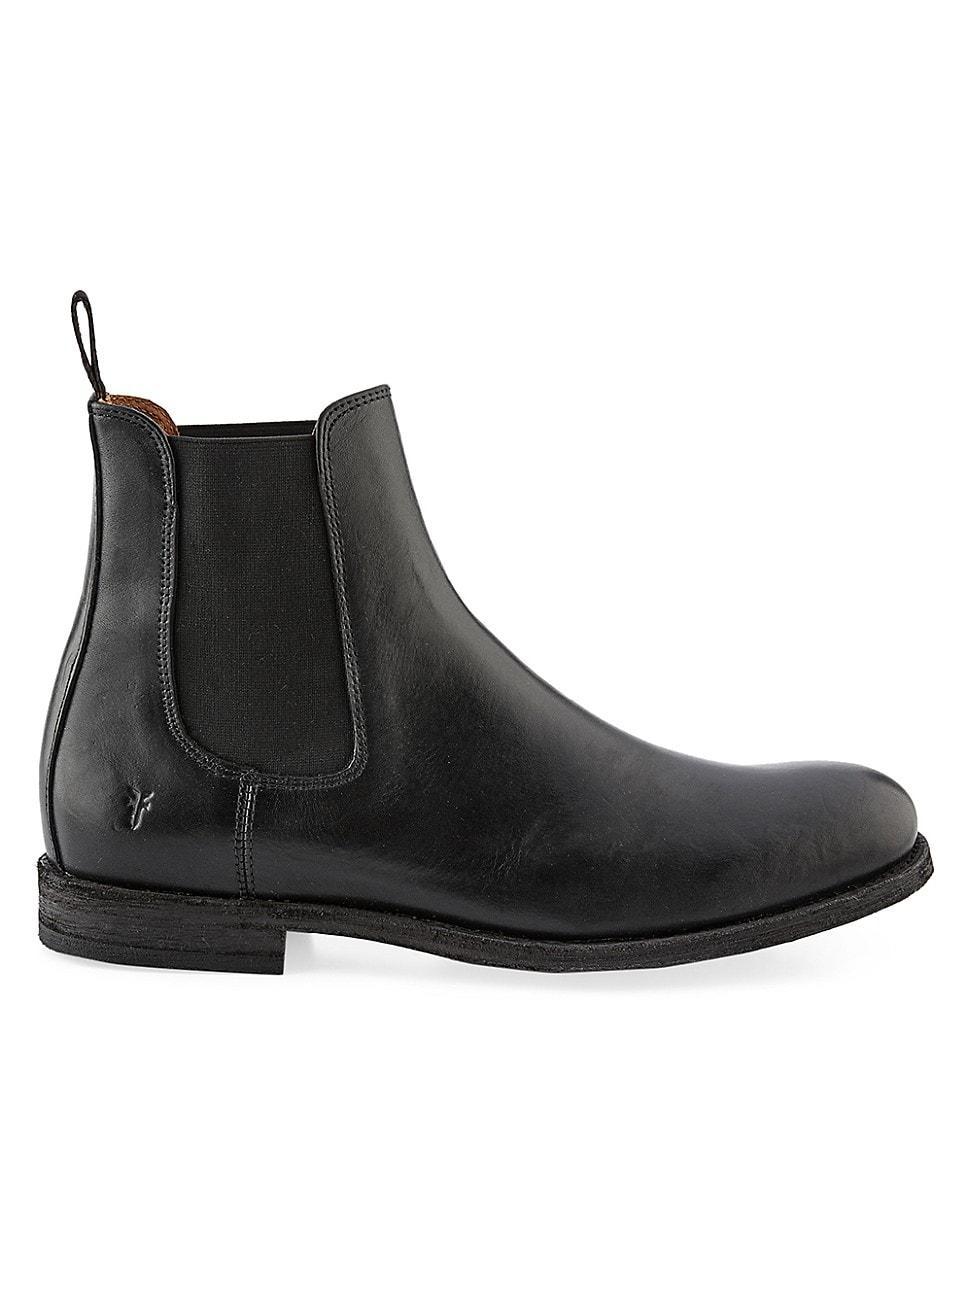 Frye Mens Tyler Leather Chelsea Boots Product Image